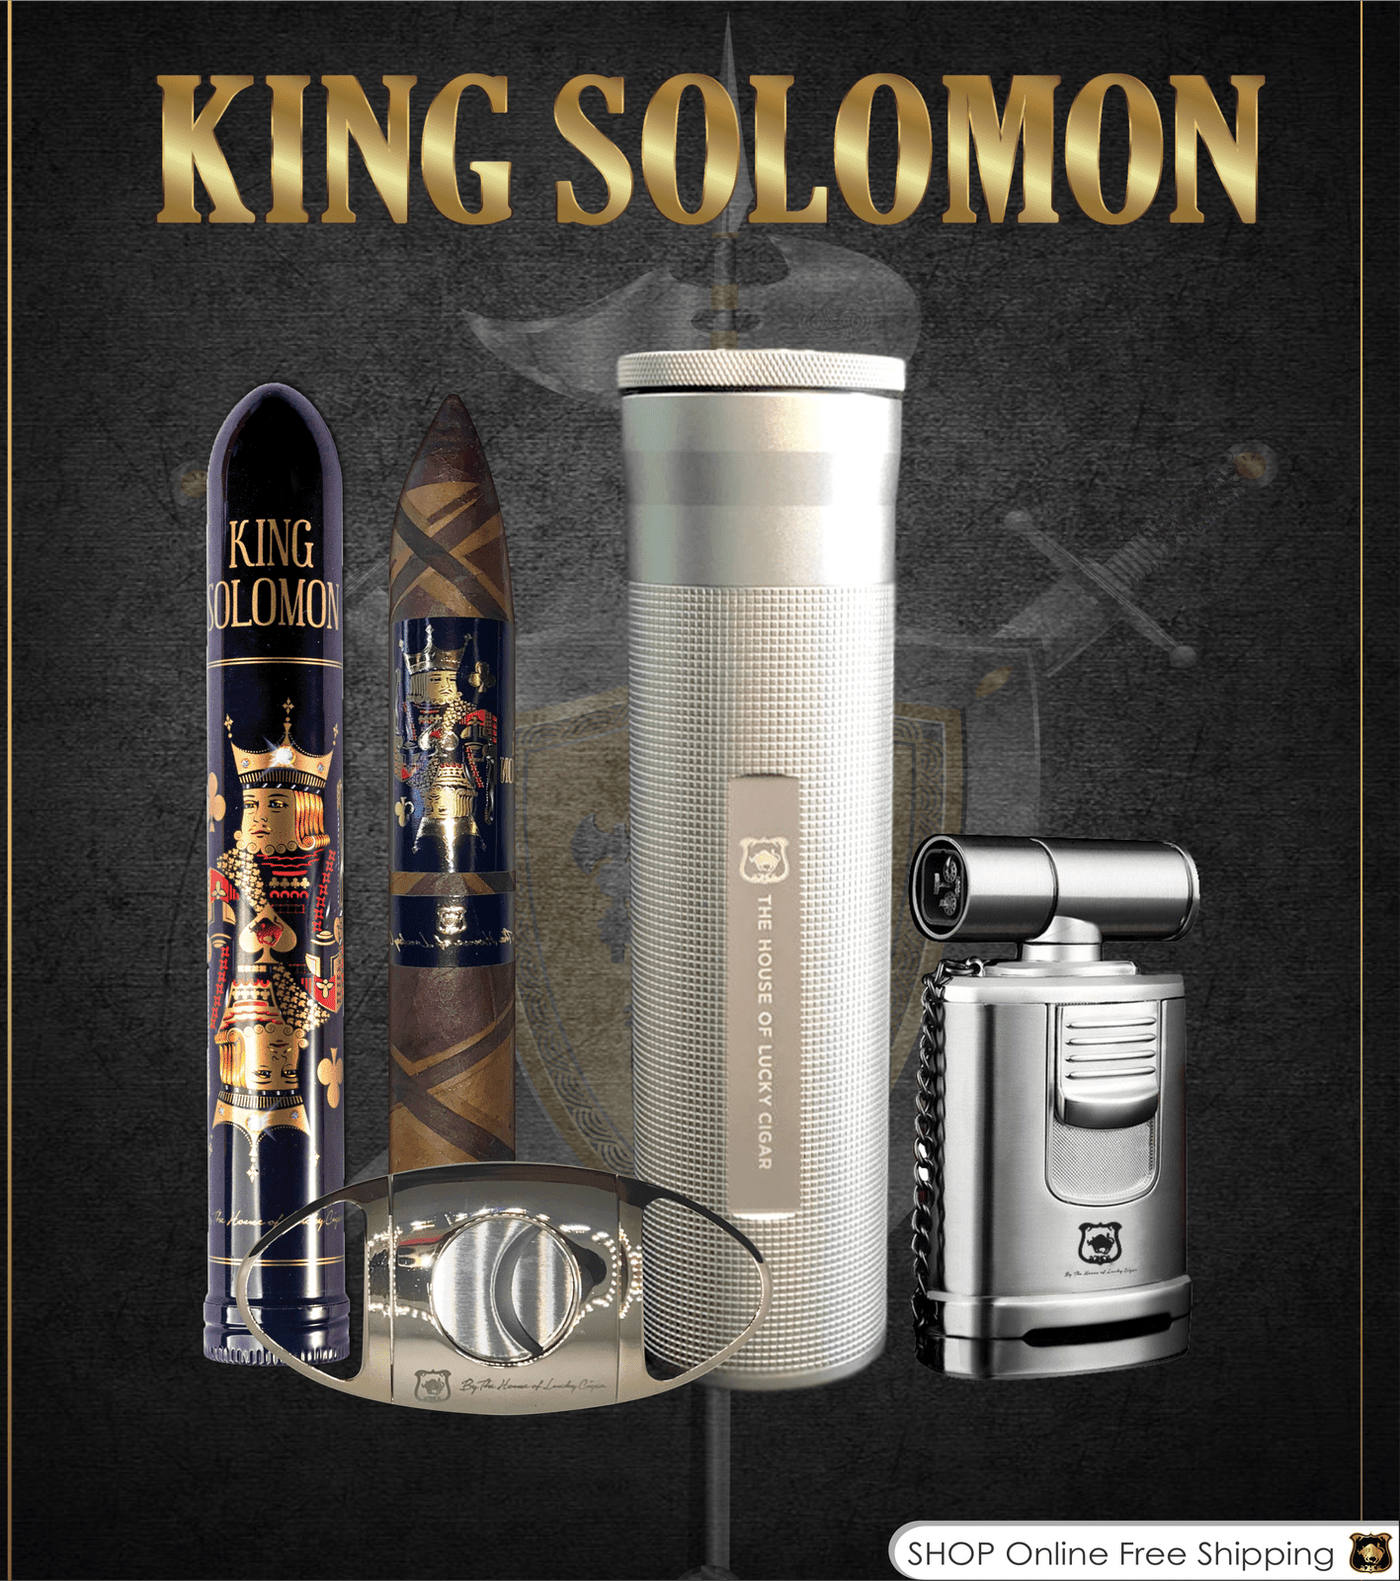 From The King Solomon Series: 1 Solomon 7x60 Cigars with Humidor, Cutter, Gun Torch Set